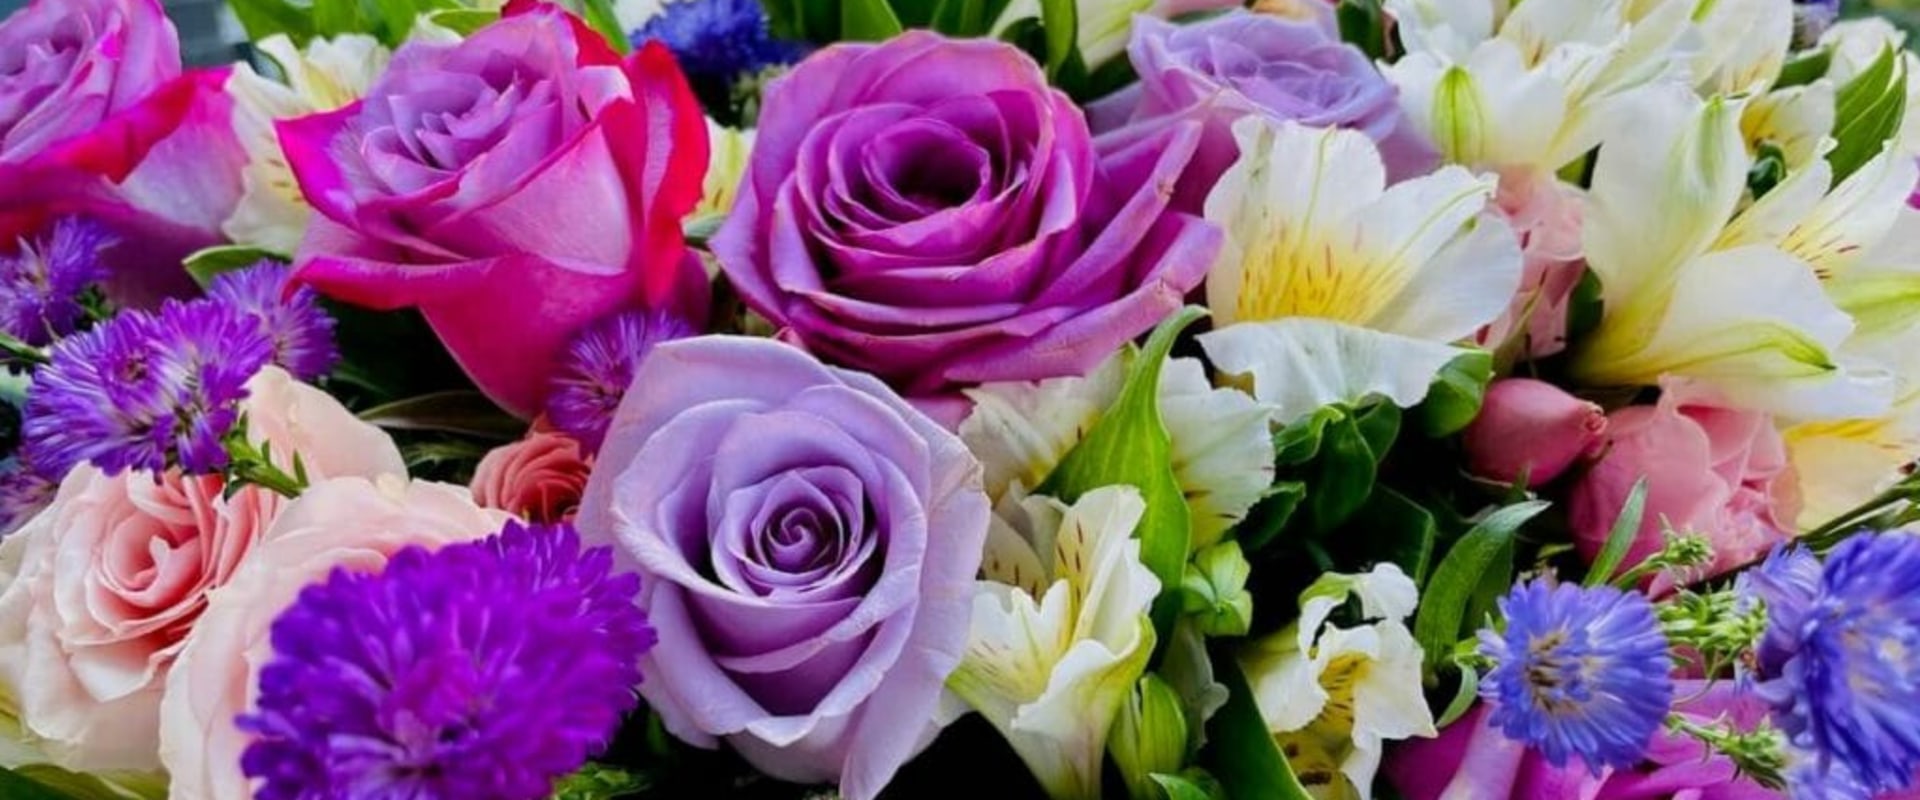 Send the Perfect Gift with Special Offers from Oklahoma City Florist